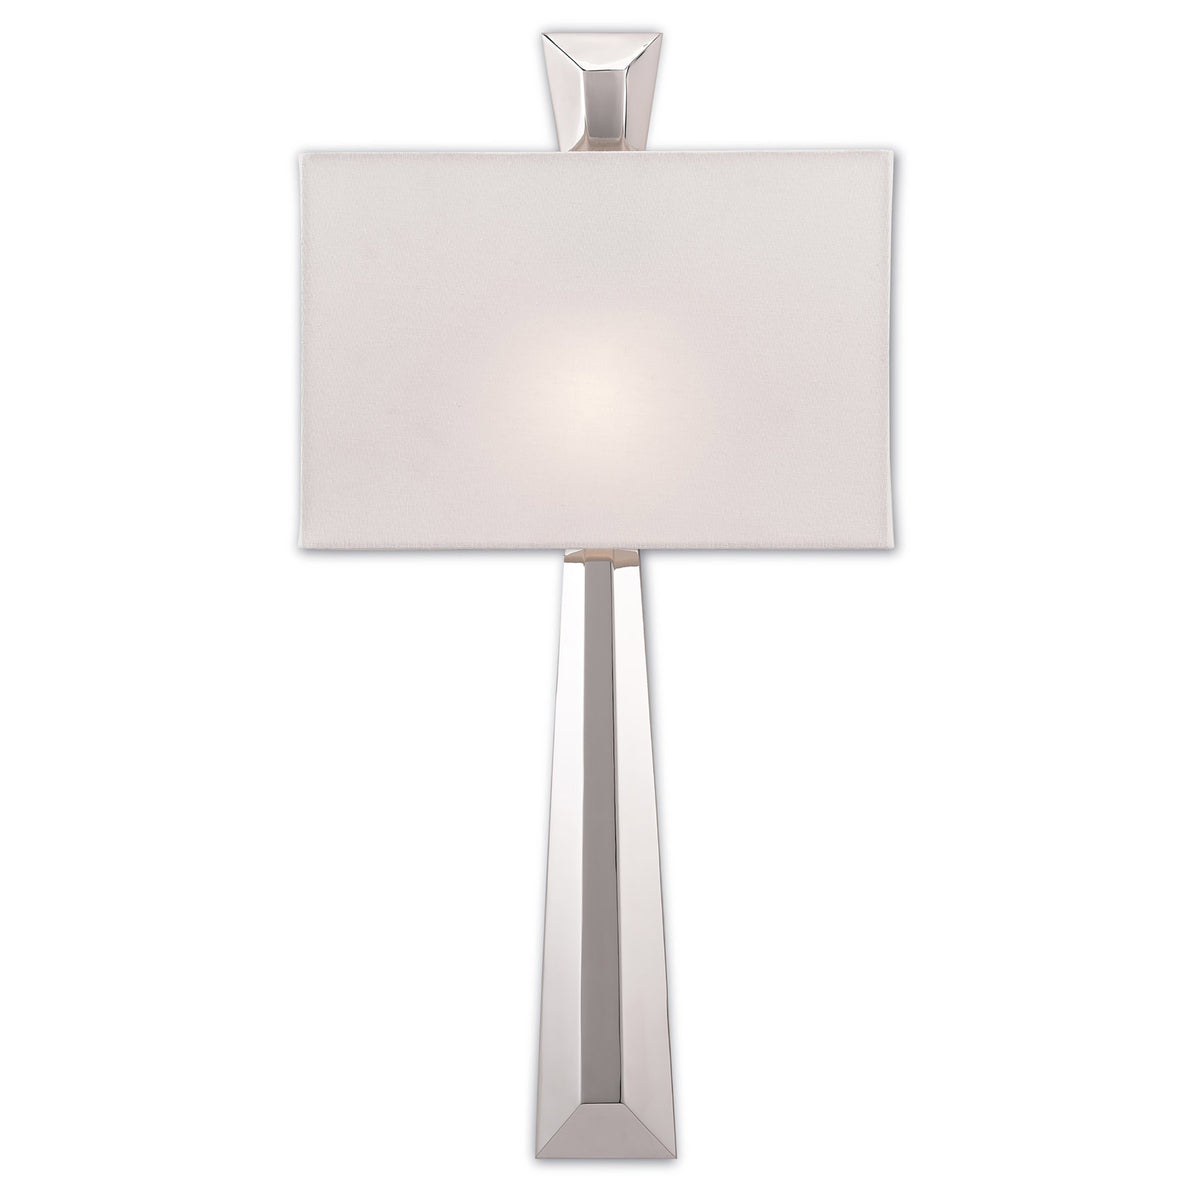 Arno Nickel Wall Sconce